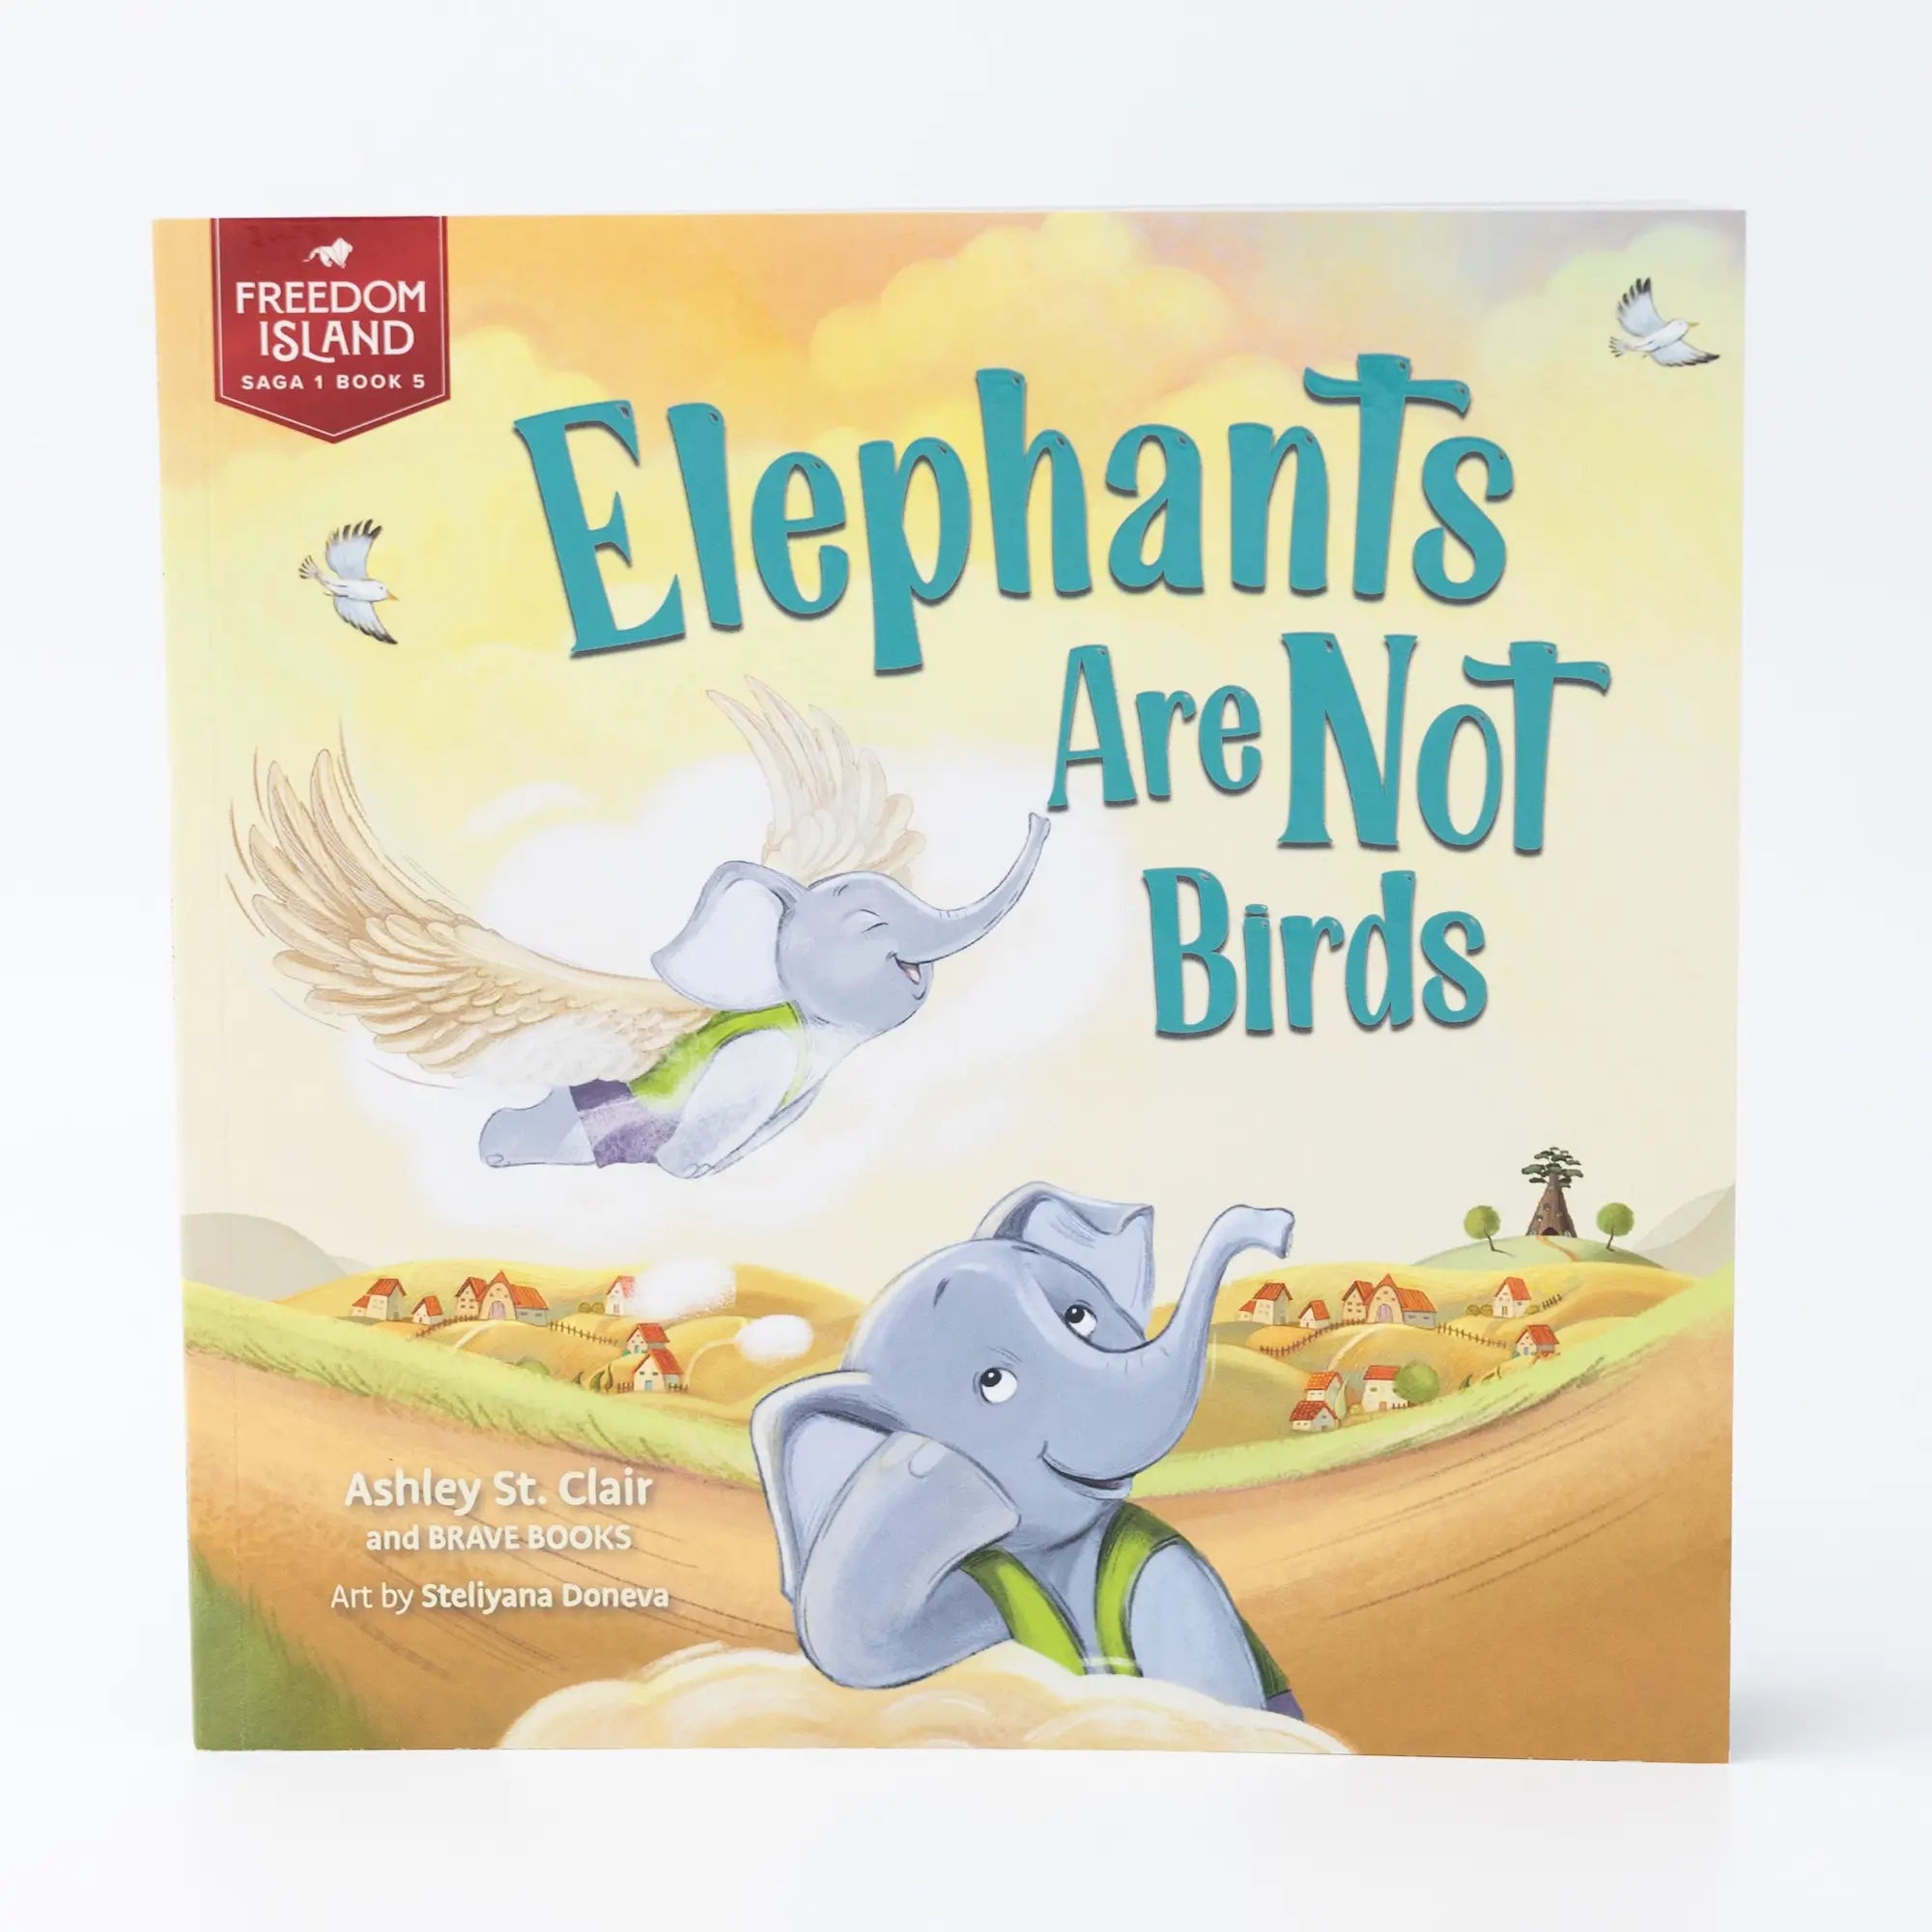 Elephants Are Not Birds cover image